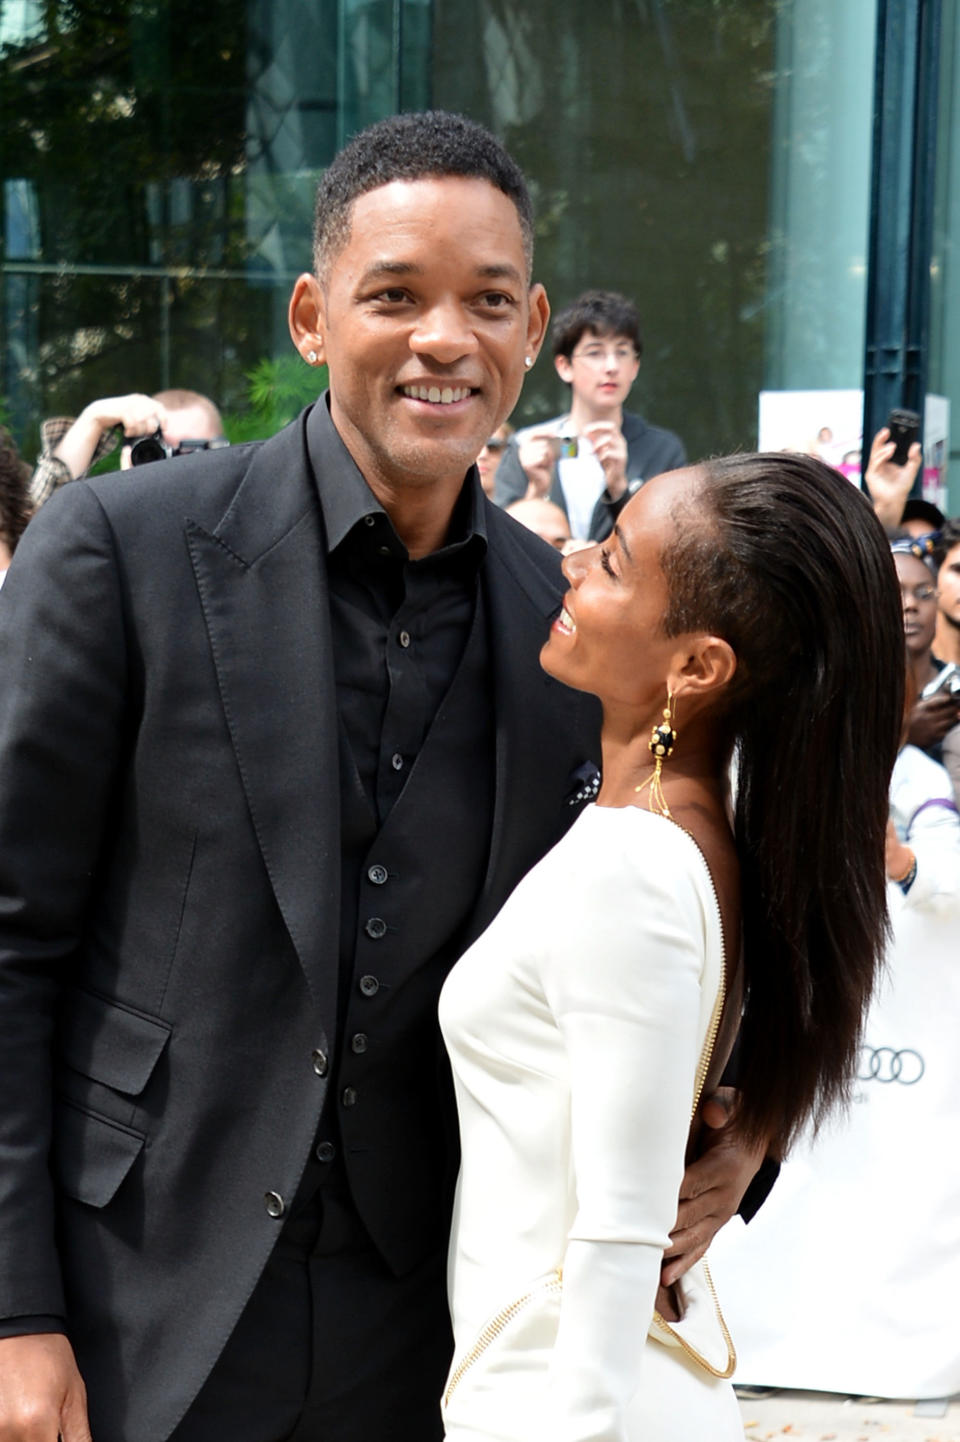 Jada and Will have been married for 11 years and have two young children, but they know how to keep the spark alive. <a href="http://www.huffingtonpost.com/2009/06/16/jada-pinkett-smith-have-s_n_216427.html">Jada told Redbook in 2011</a>: "Be sneaky... your girlfriend's house at a party. The bathroom. A bedroom. Think of places outside that are comfortable to have sex. Does he have access to his office? Have a fantasy date. Be his secretary! Pull over on the side of the road... Just switch it up."